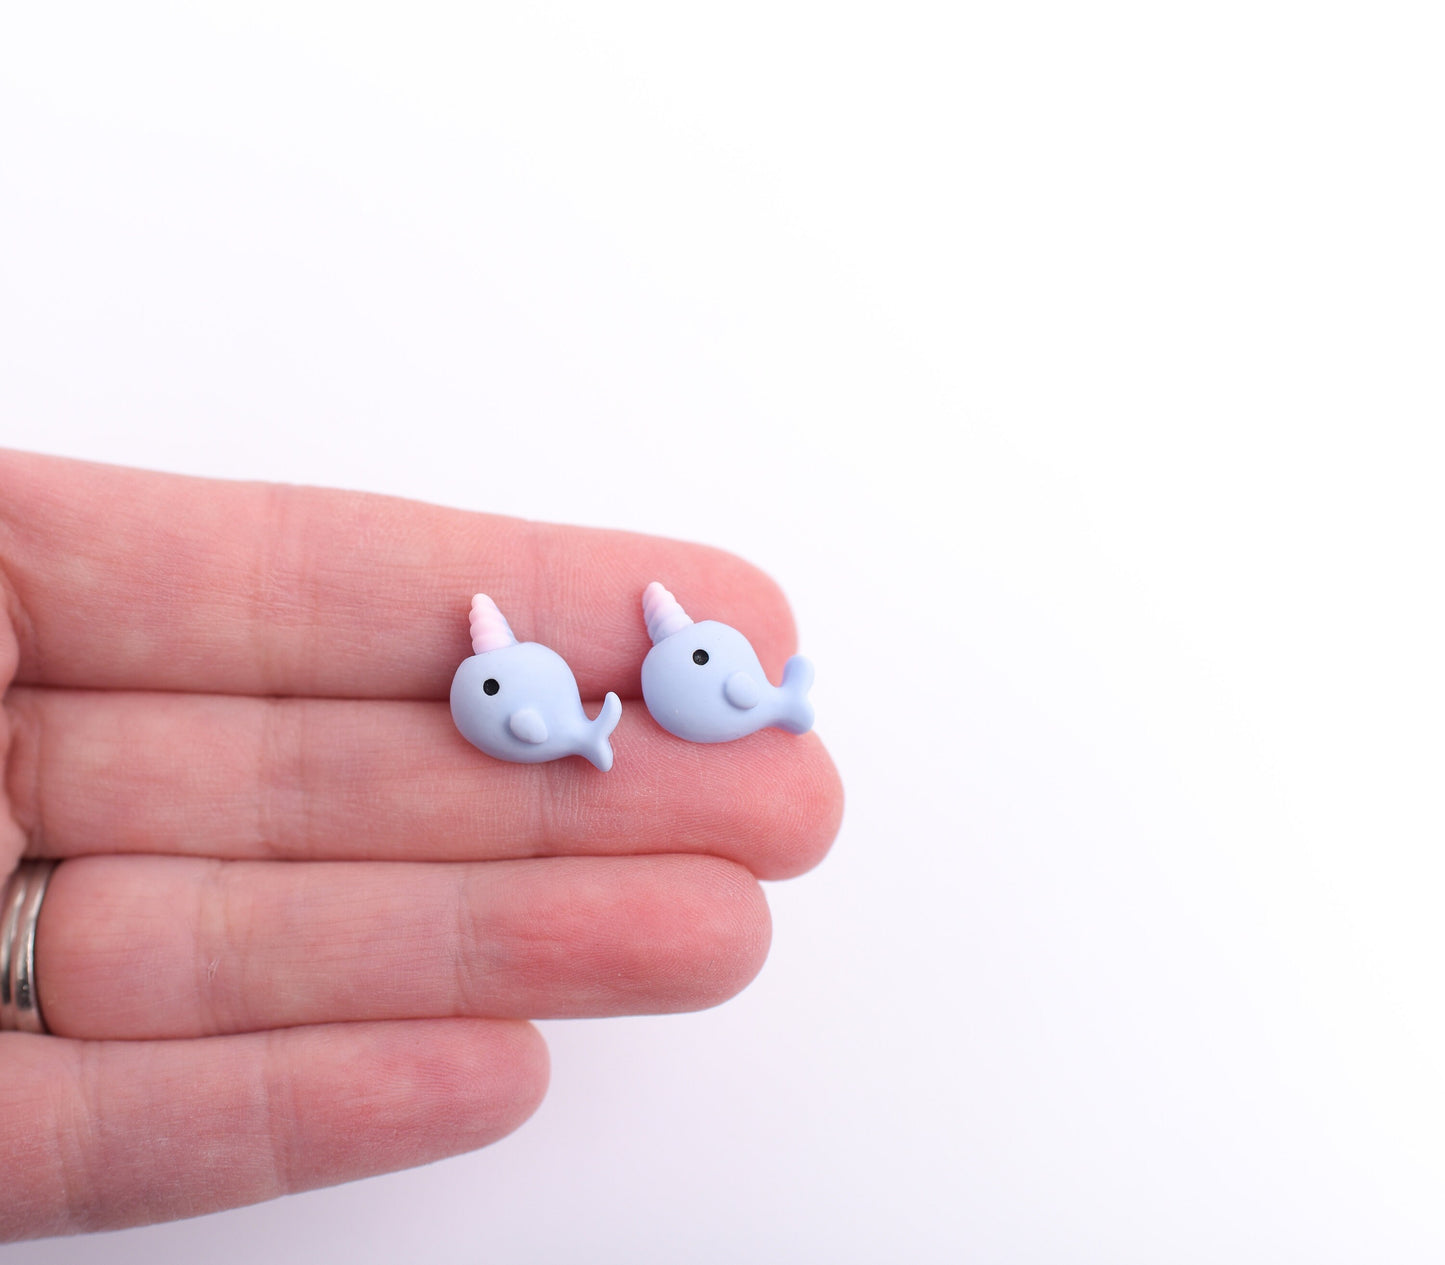 Blue Narwhal Earrings with Titanium Posts